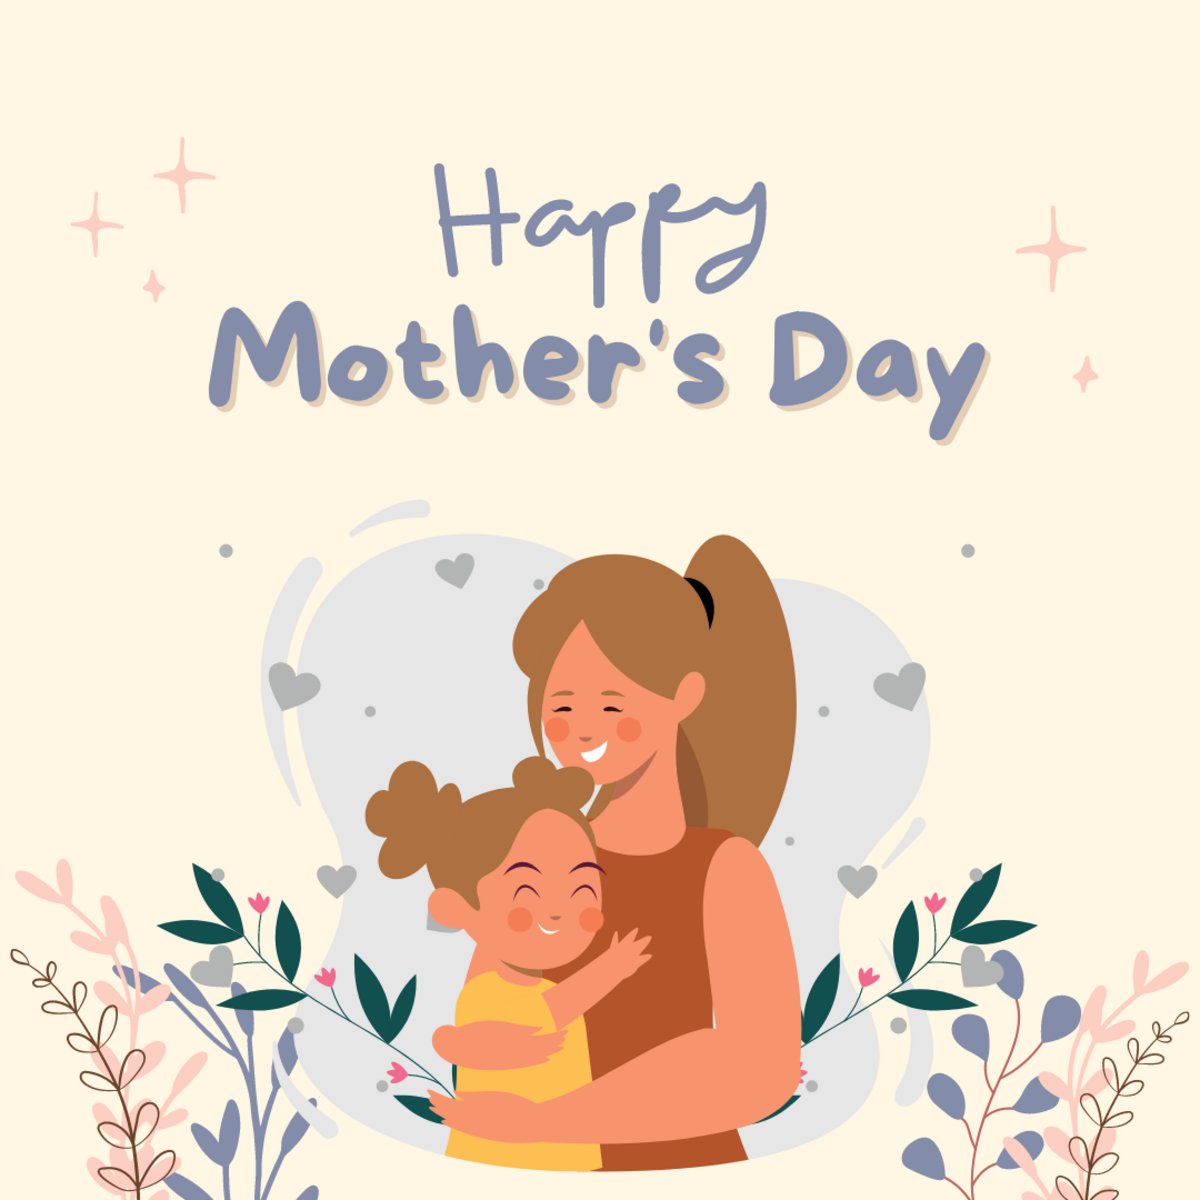 Happy Mother's day from Plaza Resort Club Hotel to all the wonderful mothers out there who make the world a better place💓 We hope you have a very special day!🤗